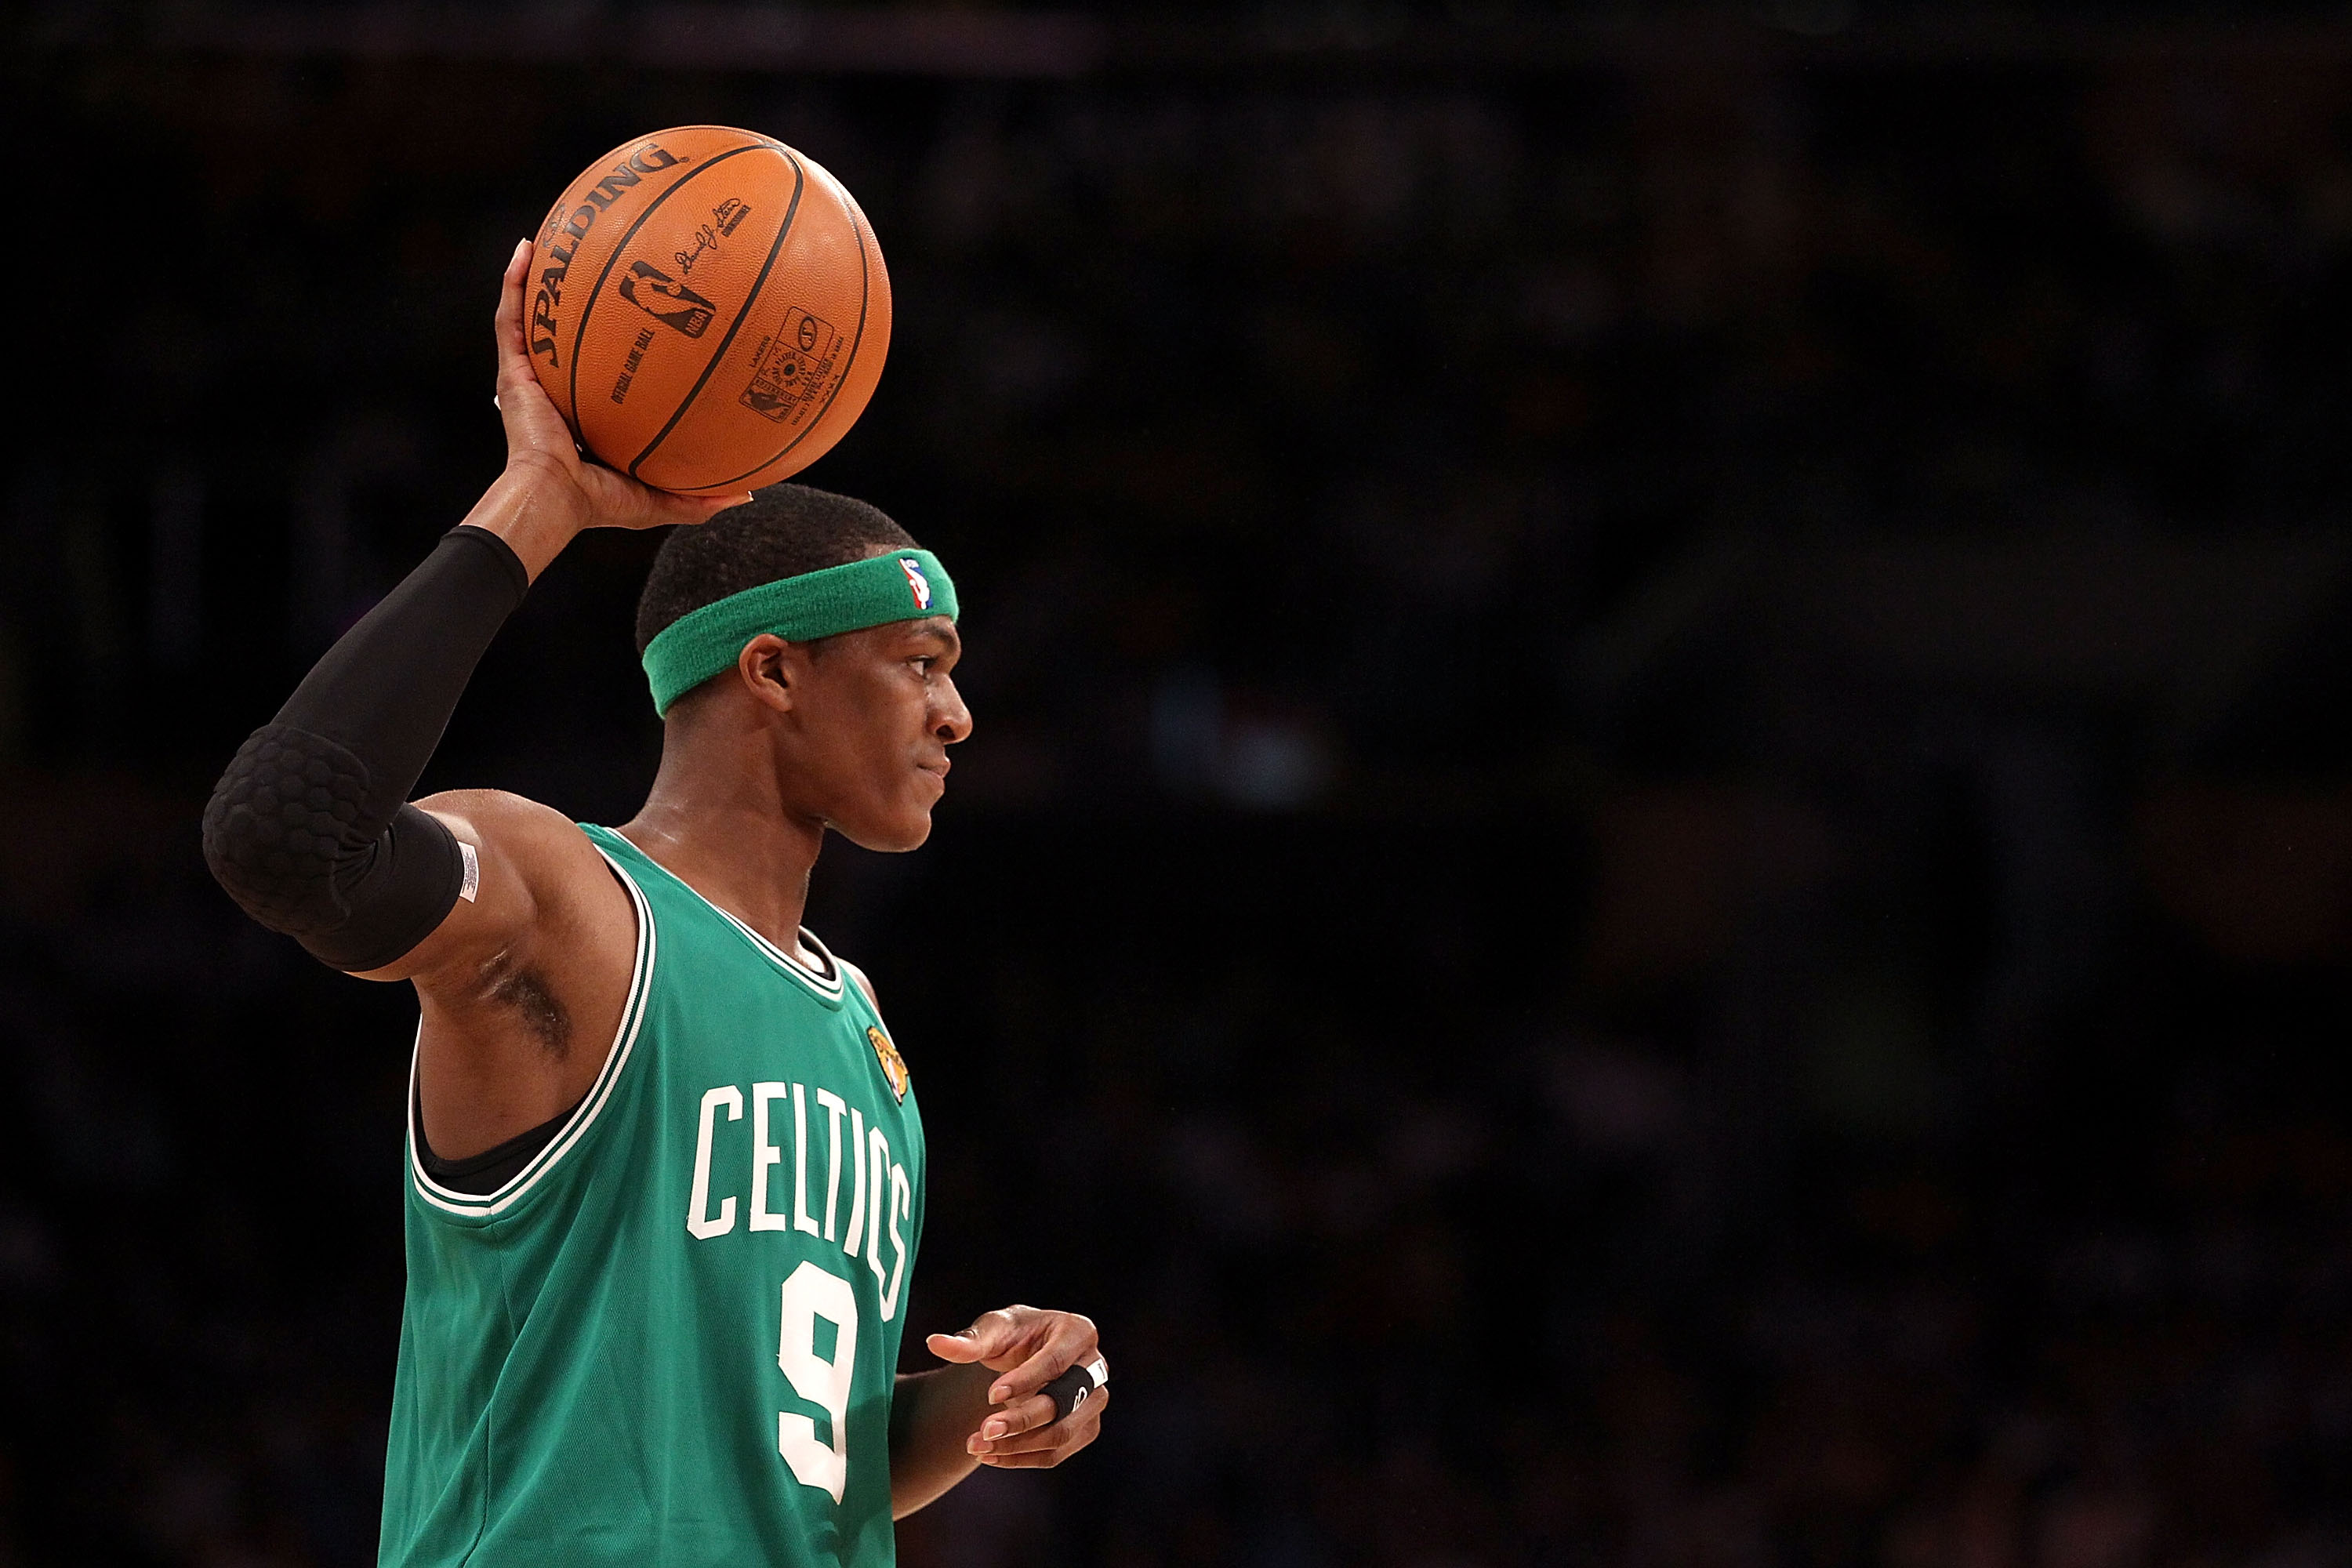 LOS ANGELES, CA - JUNE 15:  Rajon Rondo #9 of the Boston Celtics looks for an open pass in the first half against the Los Angeles Lakers in Game Six of the 2010 NBA Finals at Staples Center on June 15, 2010 in Los Angeles, California.  NOTE TO USER: User